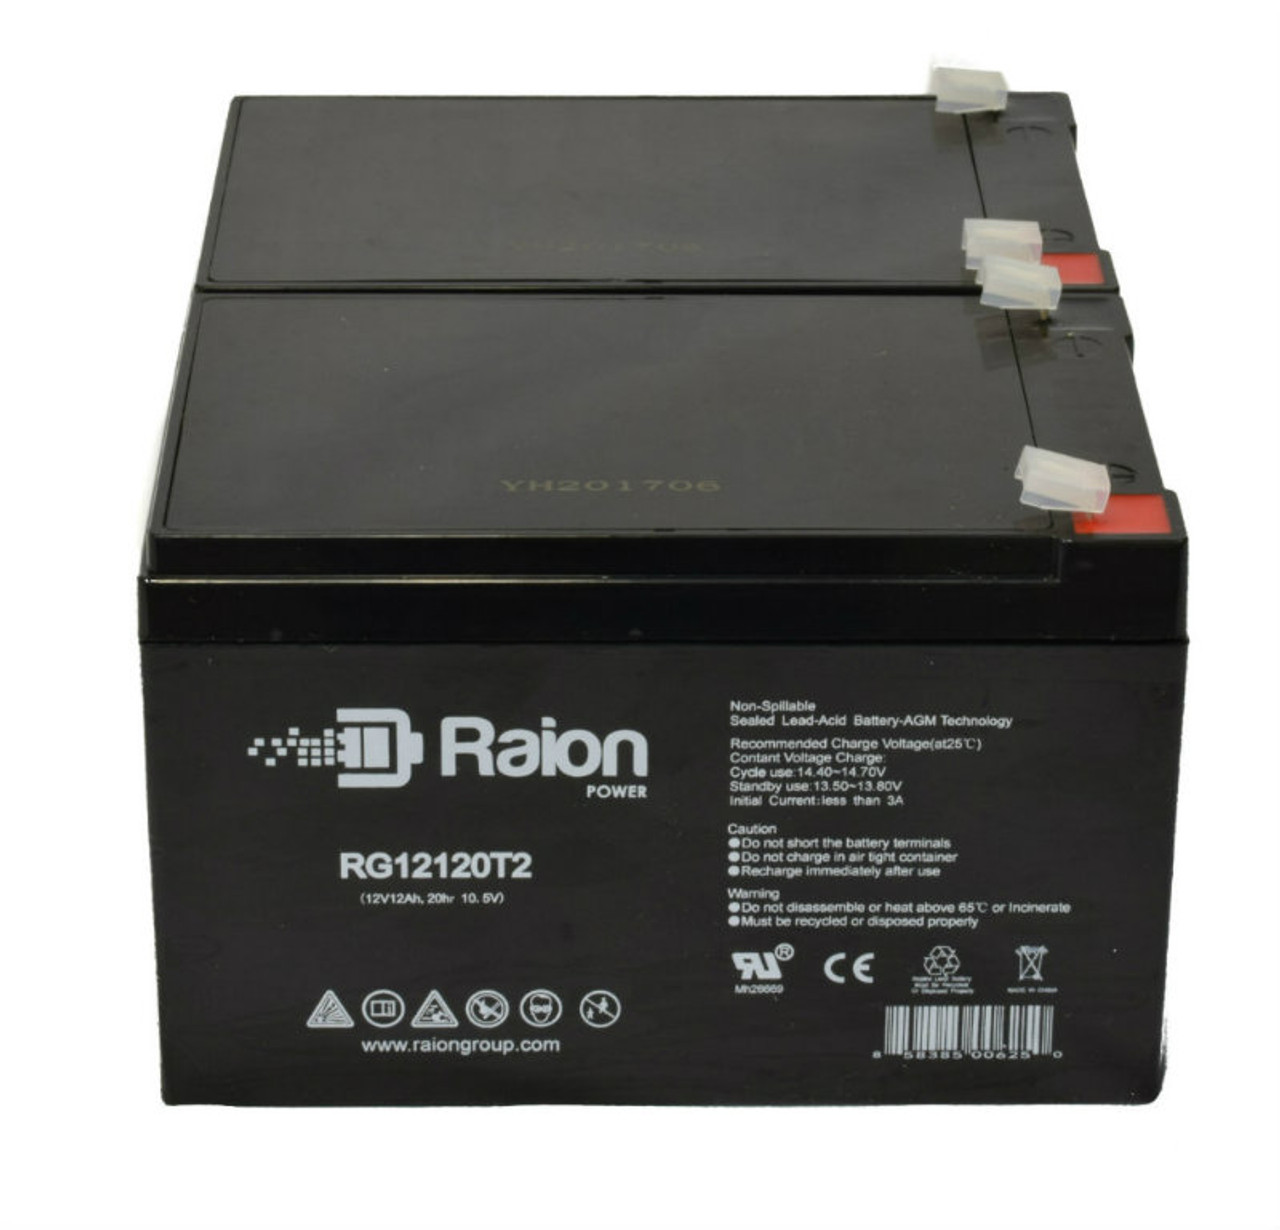 Raion Power 12V 12Ah Non-Spillable Compatible Replacement Battery for National Battery C21A - (2 Pack)